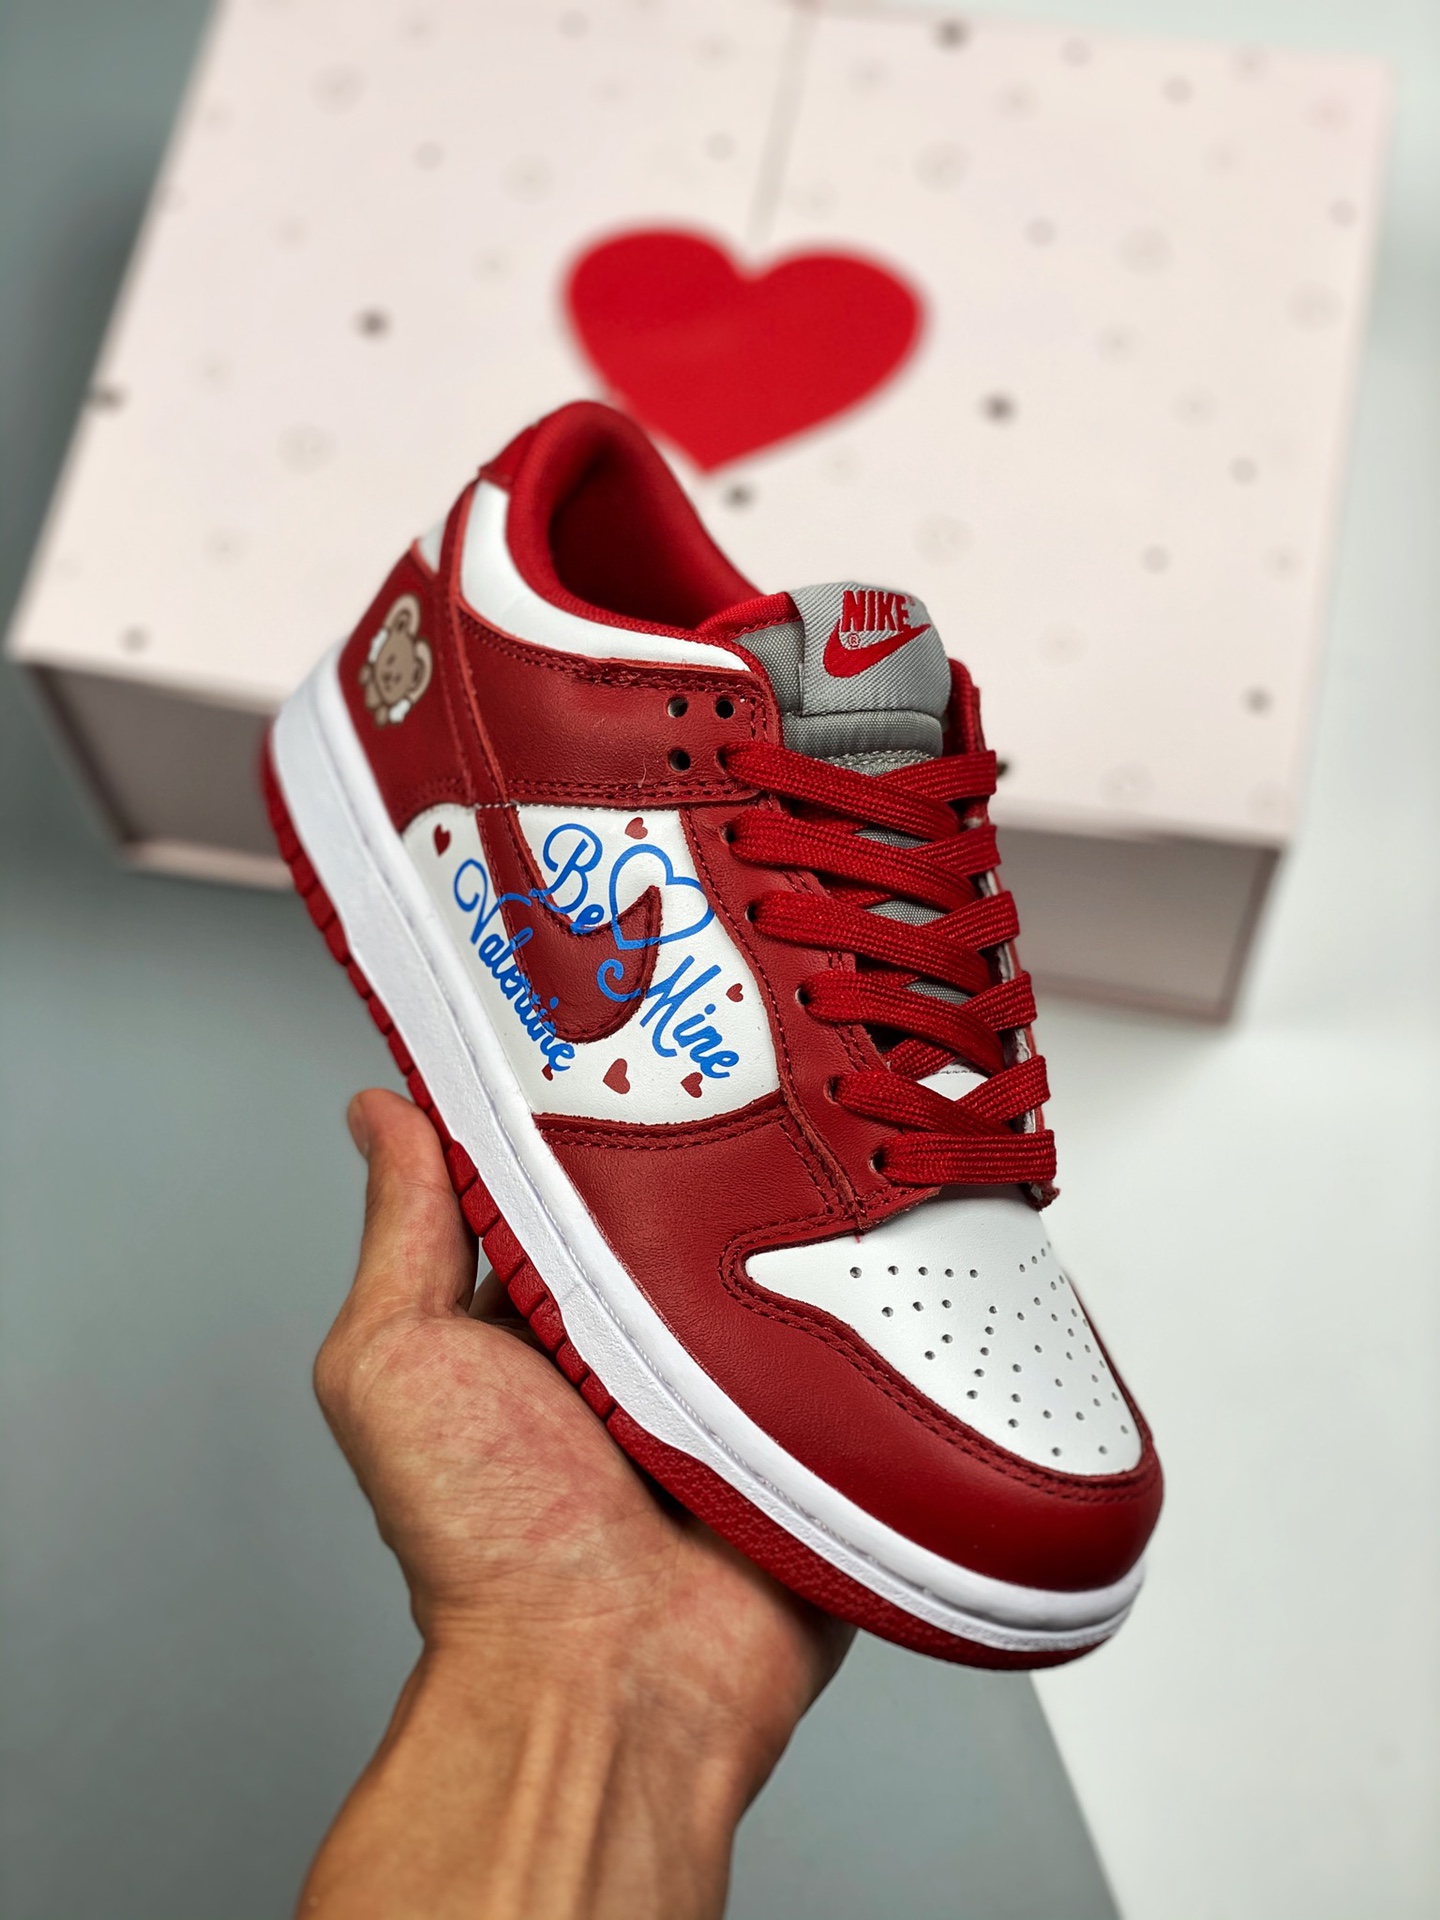 Nike SB Dunk Low “Valentine’s Day” For Sale Sneaker Hello